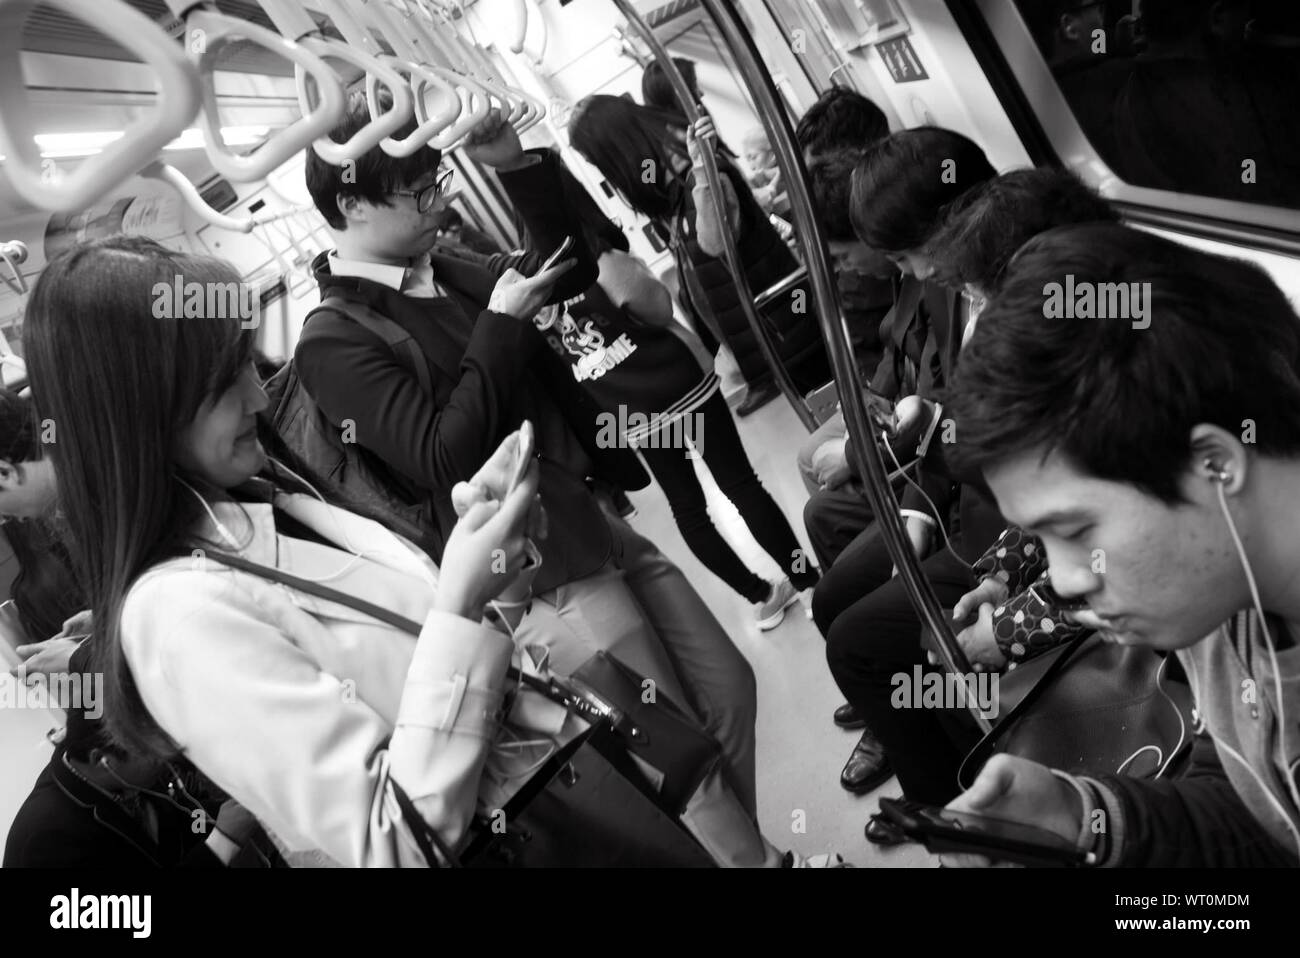 People Using Cell Phones While Traveling In Train Stock Photo